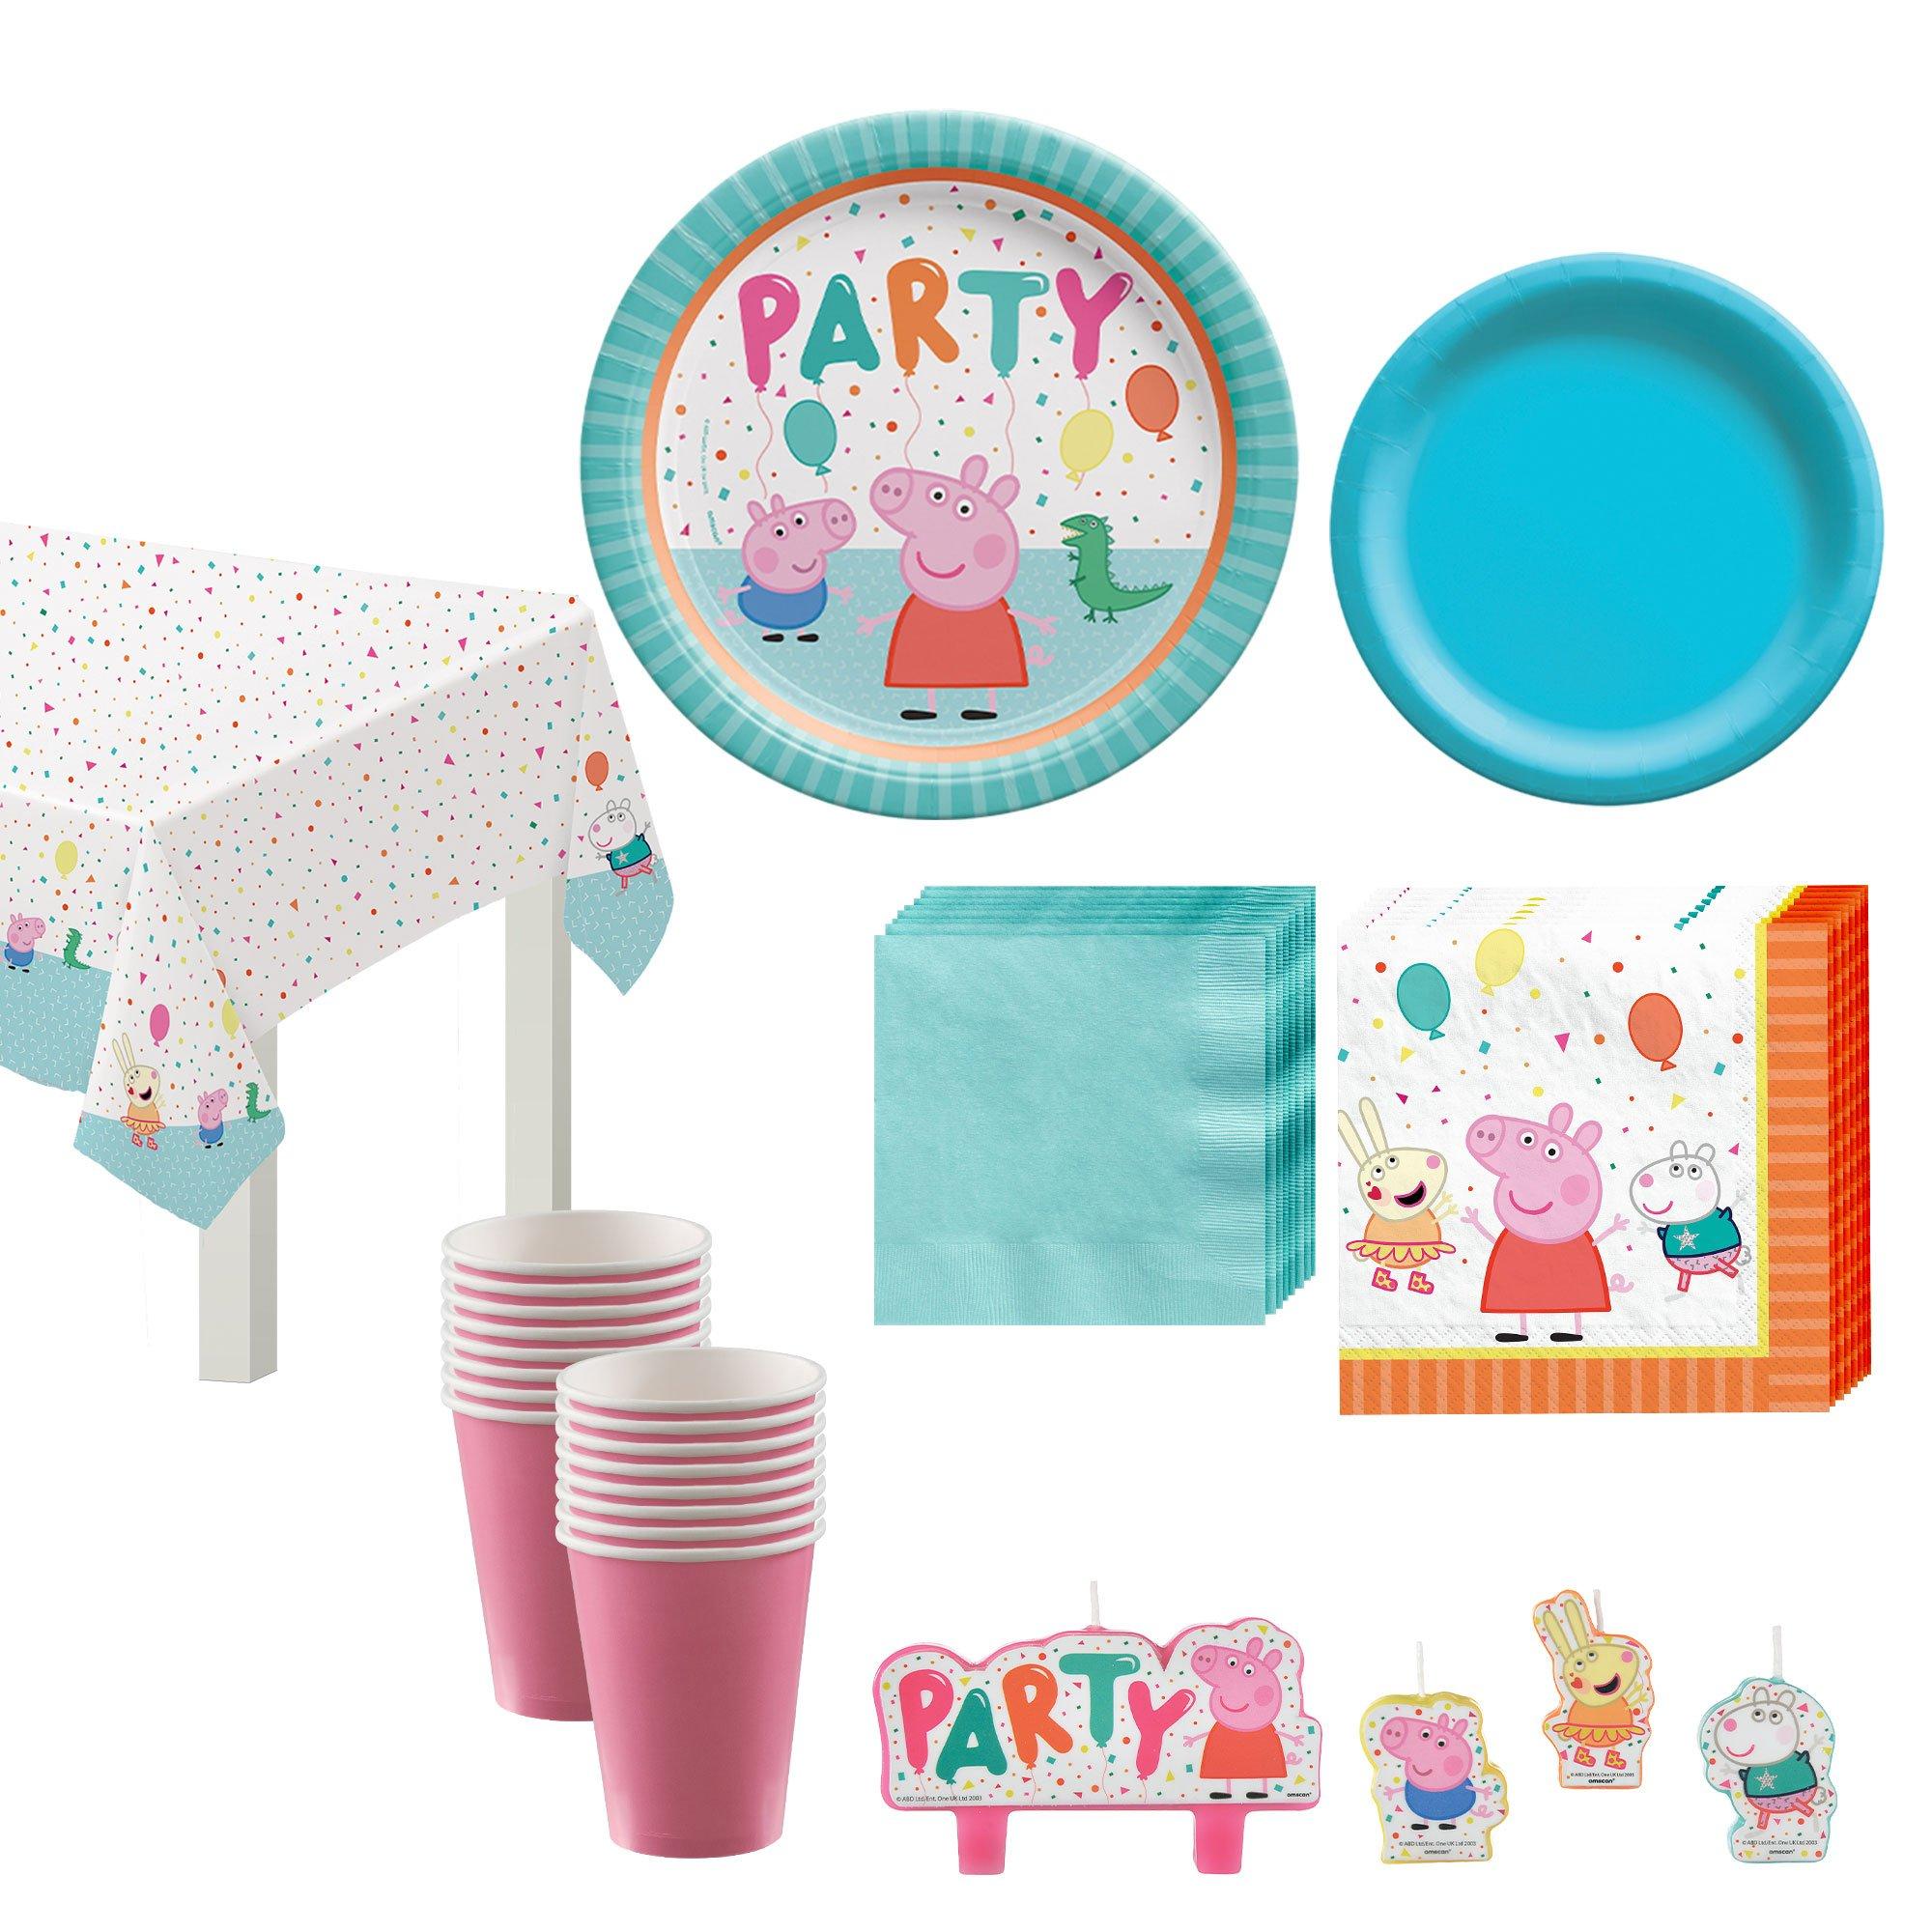 Peppa Pig Plastic Party Cups 16 oz Set of 3